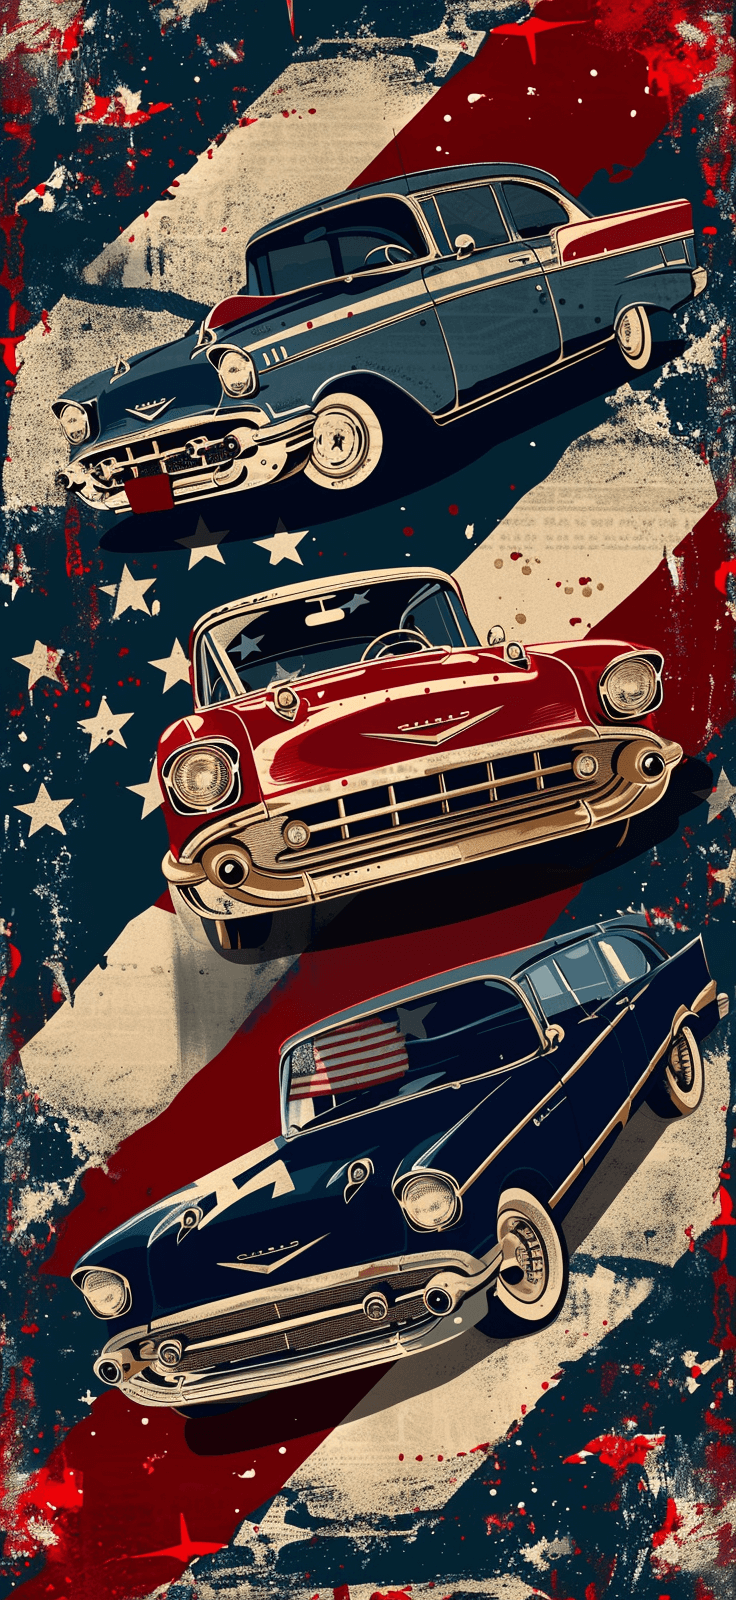 Old American cars, flag background. American iPhone wallpaper.